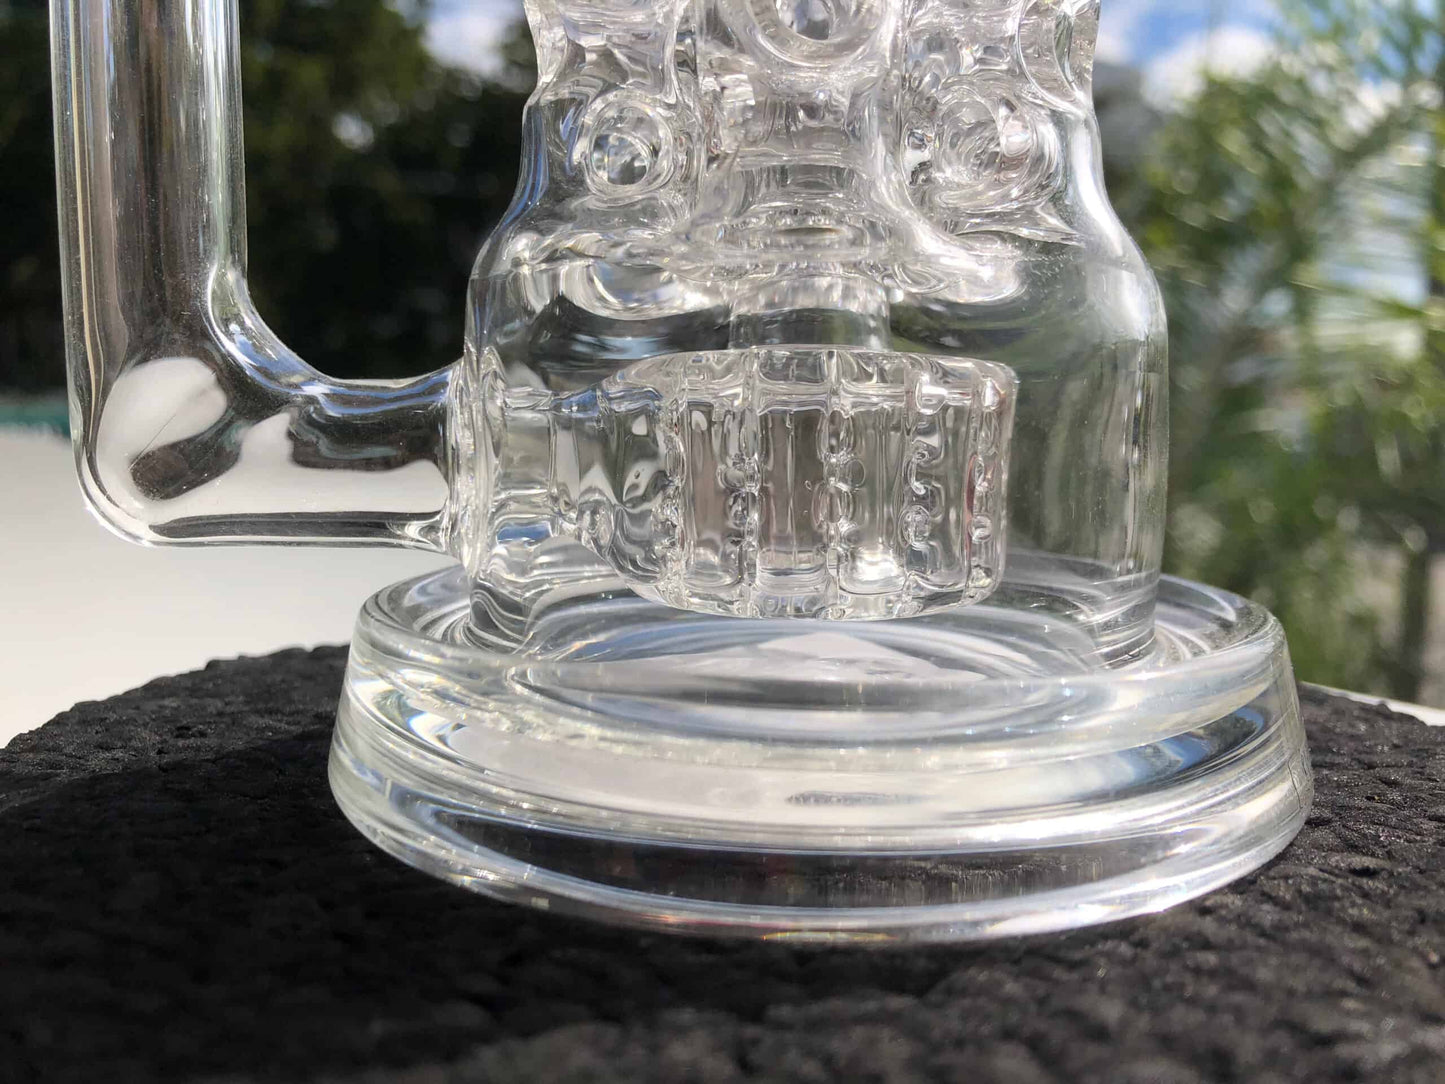 artisan-crafted art piece - (L17) Swiss Pillar Incycler by Leisure